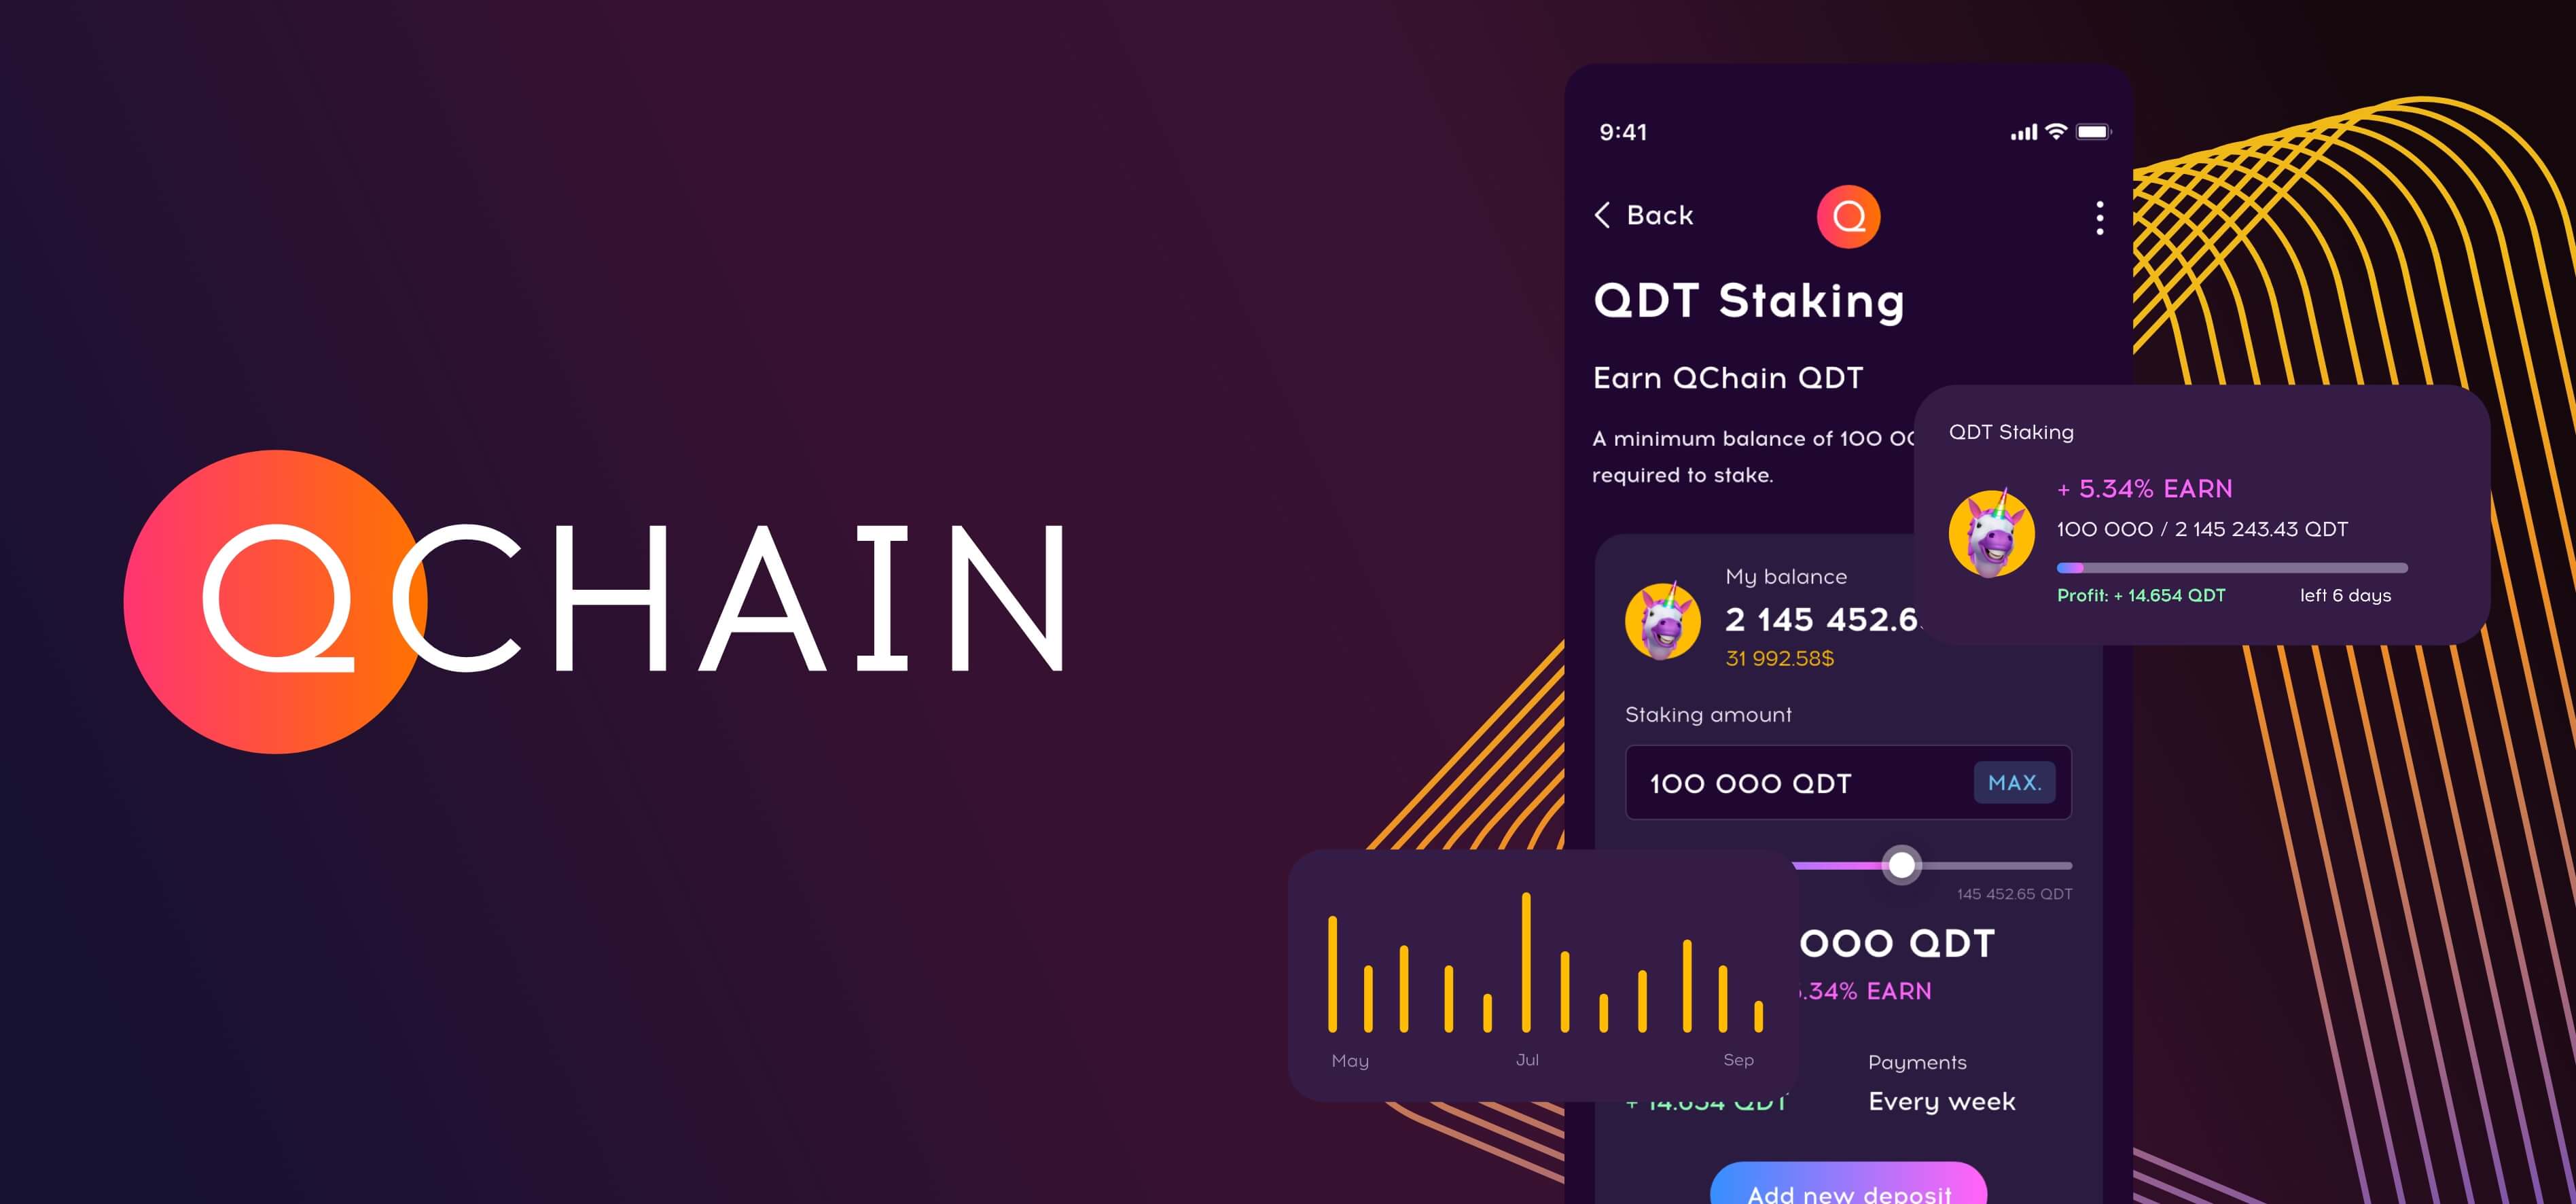 The launch of our QStaking service